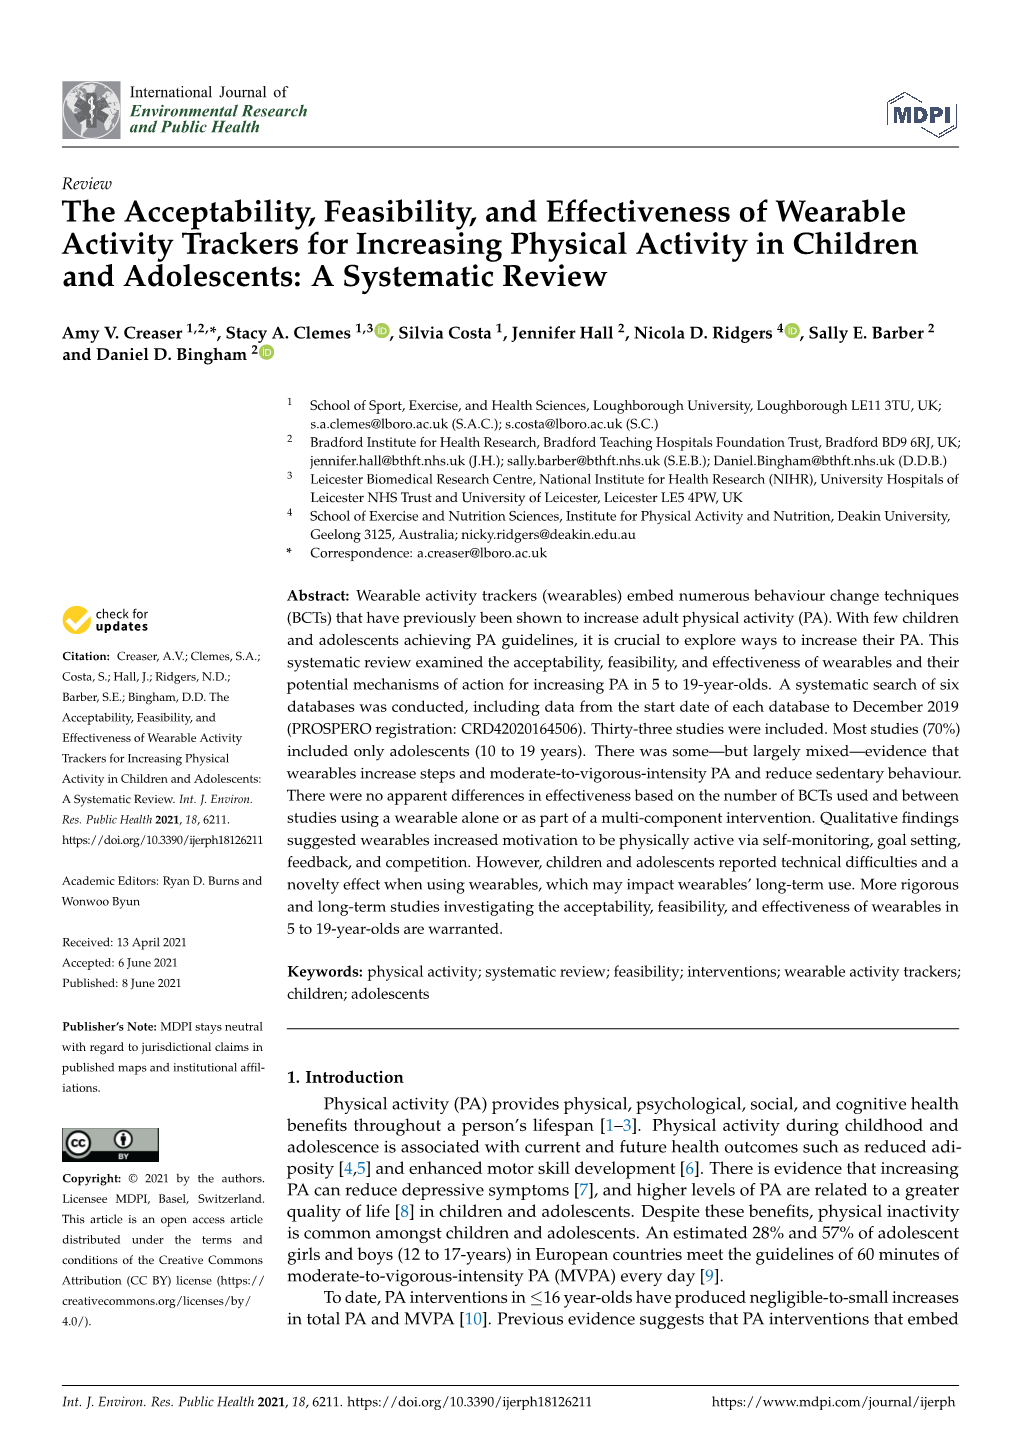 The Acceptability, Feasibility, and Effectiveness of Wearable Activity Trackers for Increasing Physical Activity in Children and Adolescents: a Systematic Review